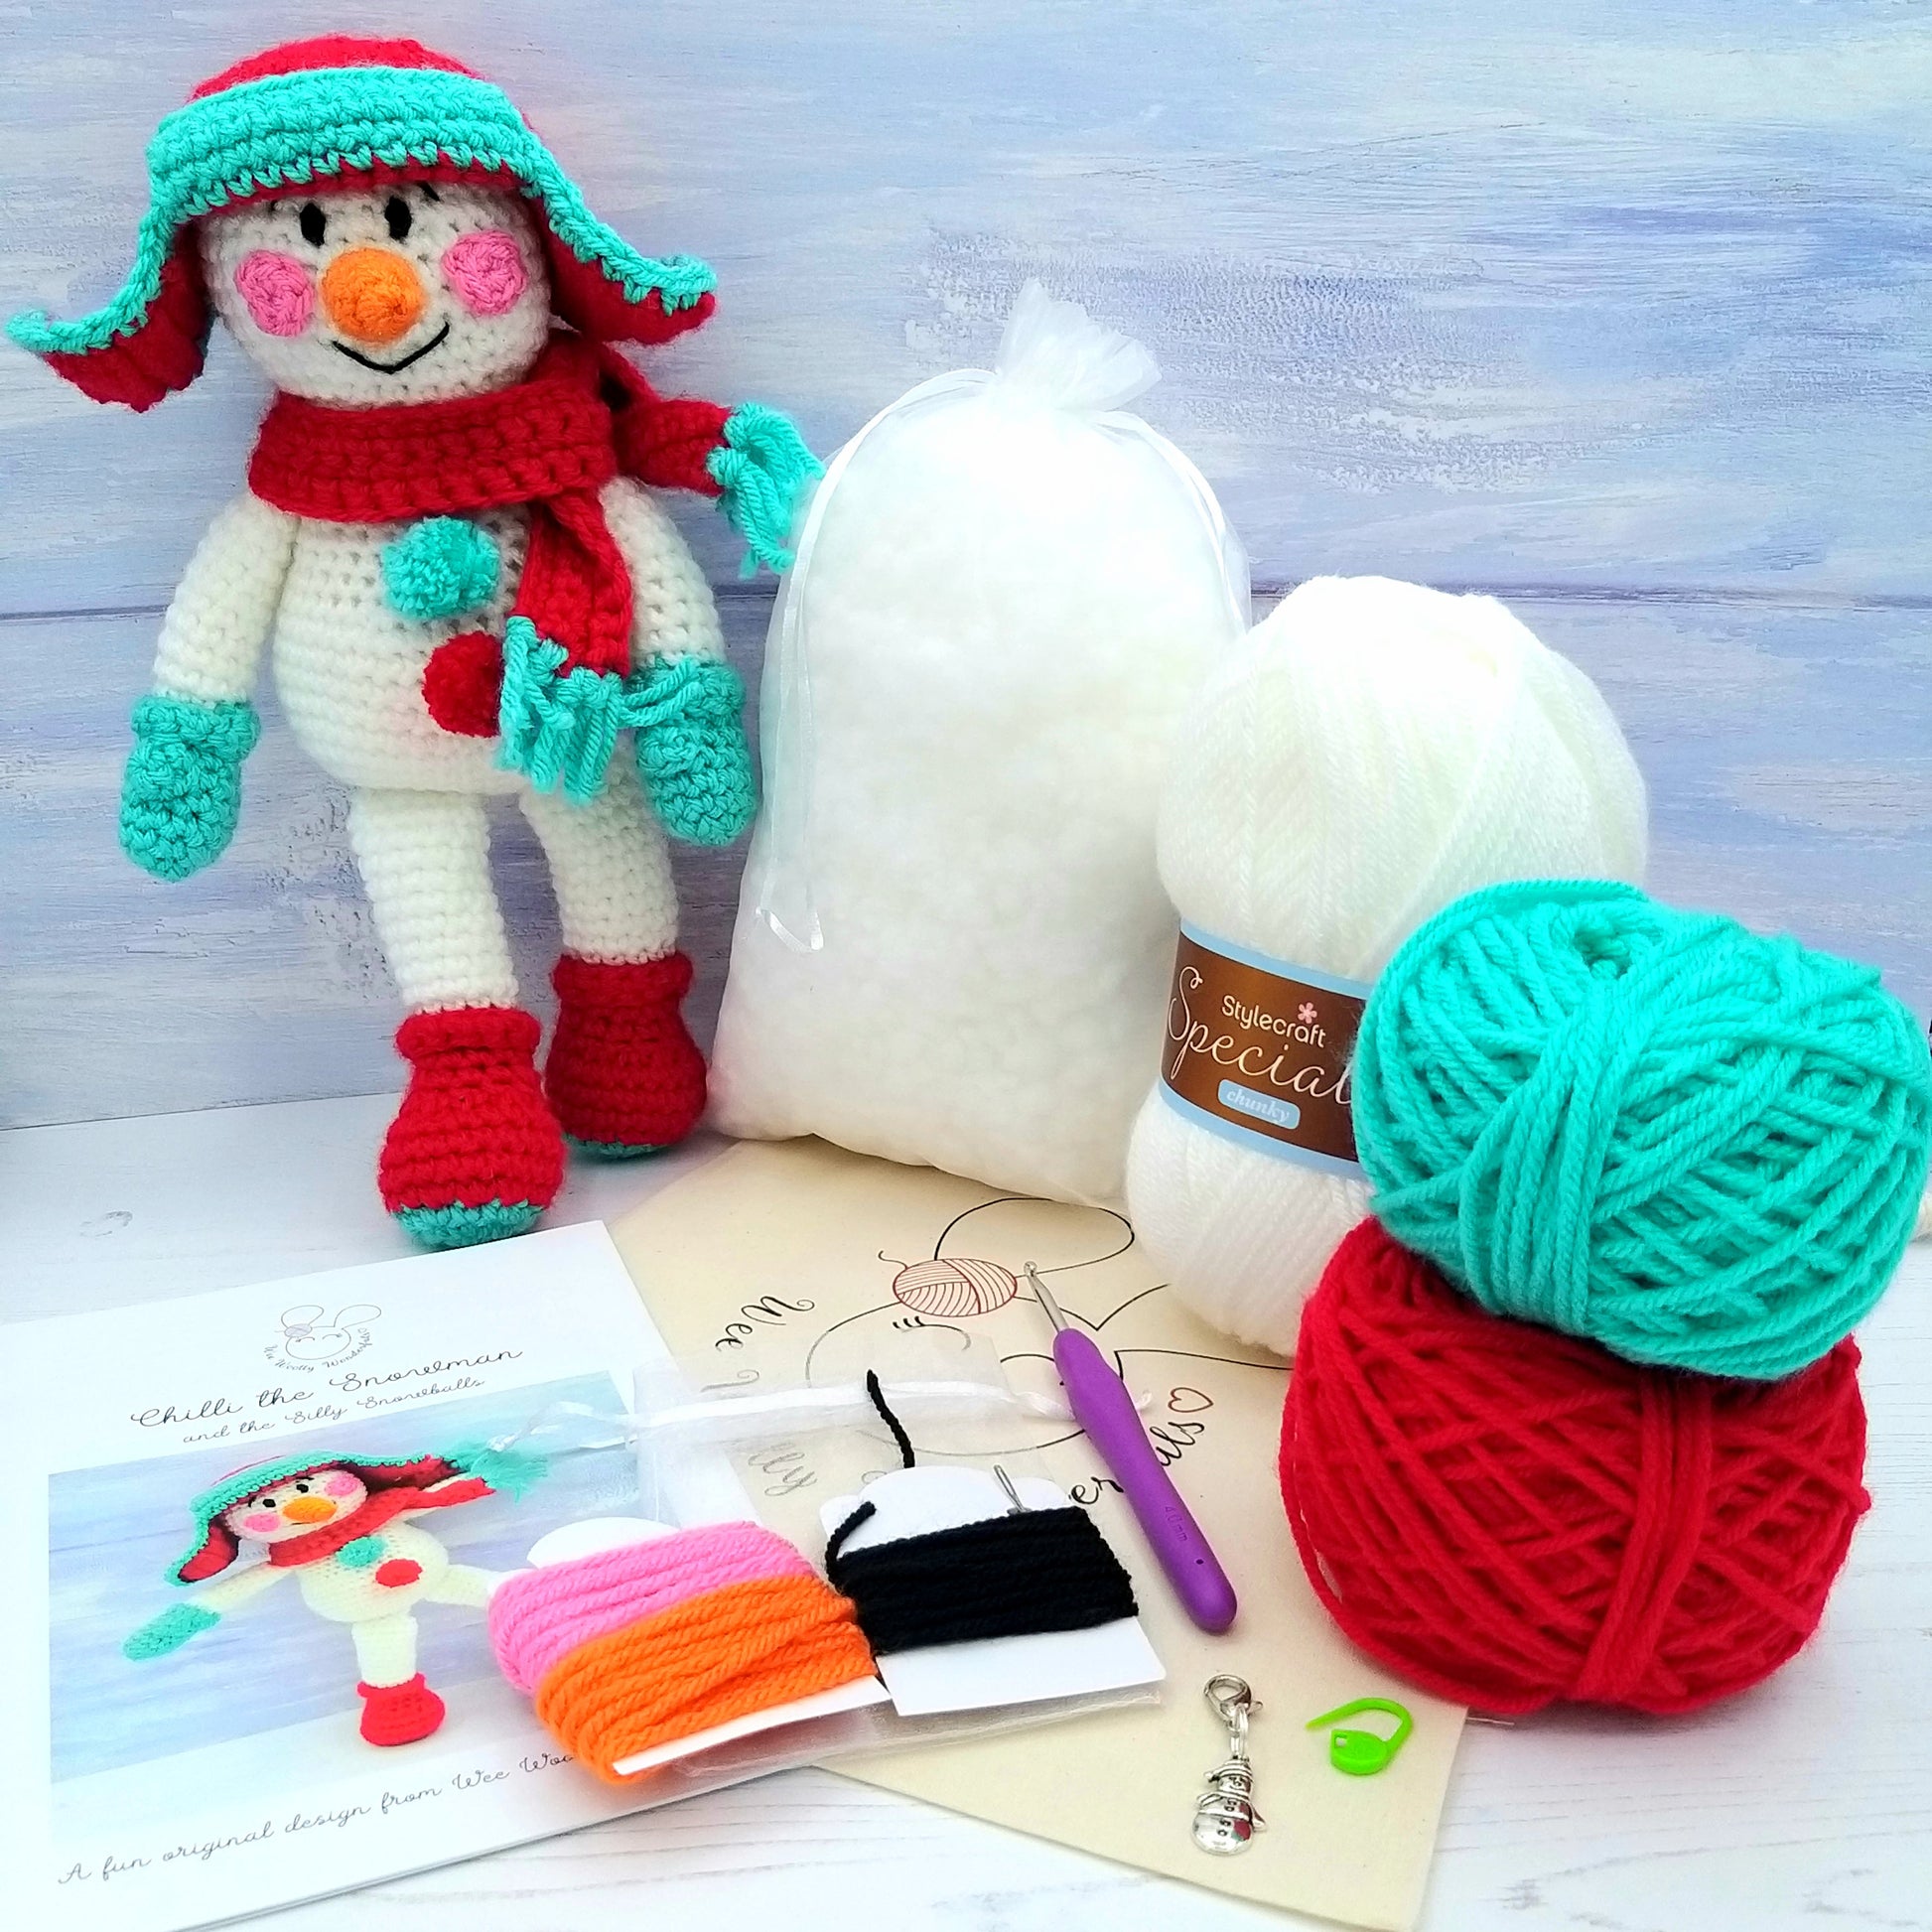 Contents of Snowman Crochet Kit - Wool, Pattern and project bag